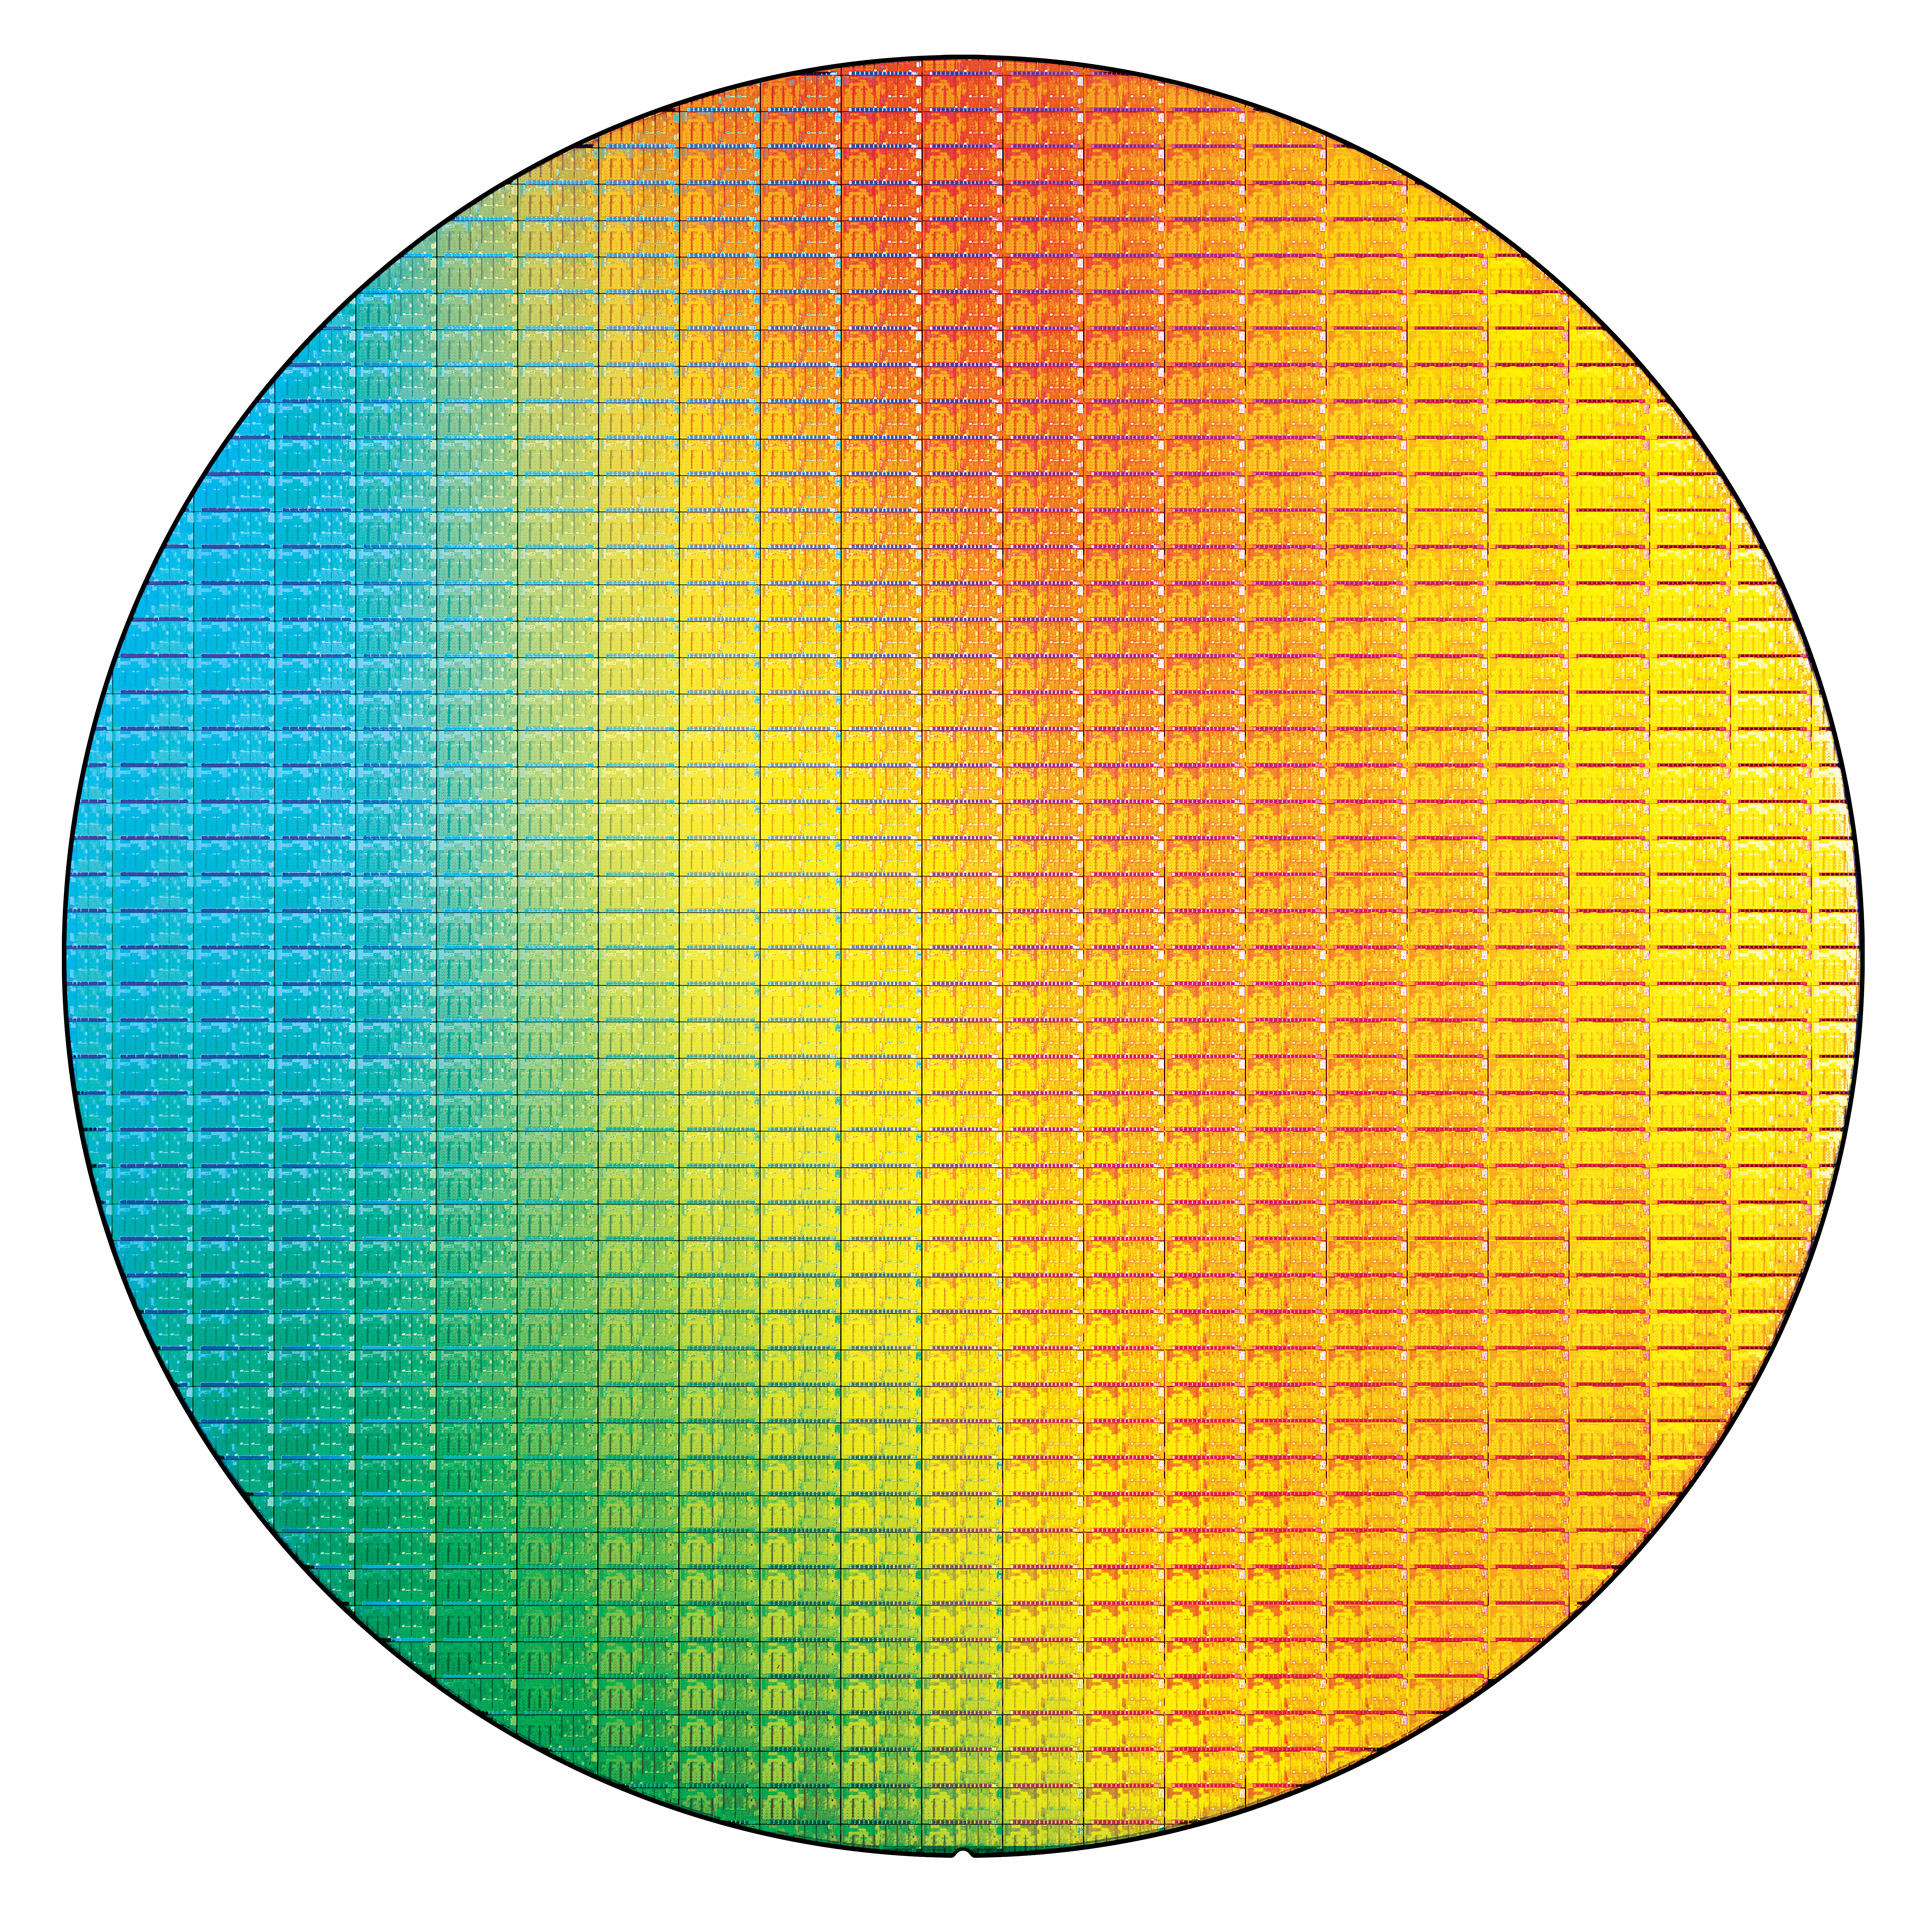 Figure 1 - An Intel 14nm wafer, codenamed ‘Broadwell’, uses the finFET transistor architecture for improved performance